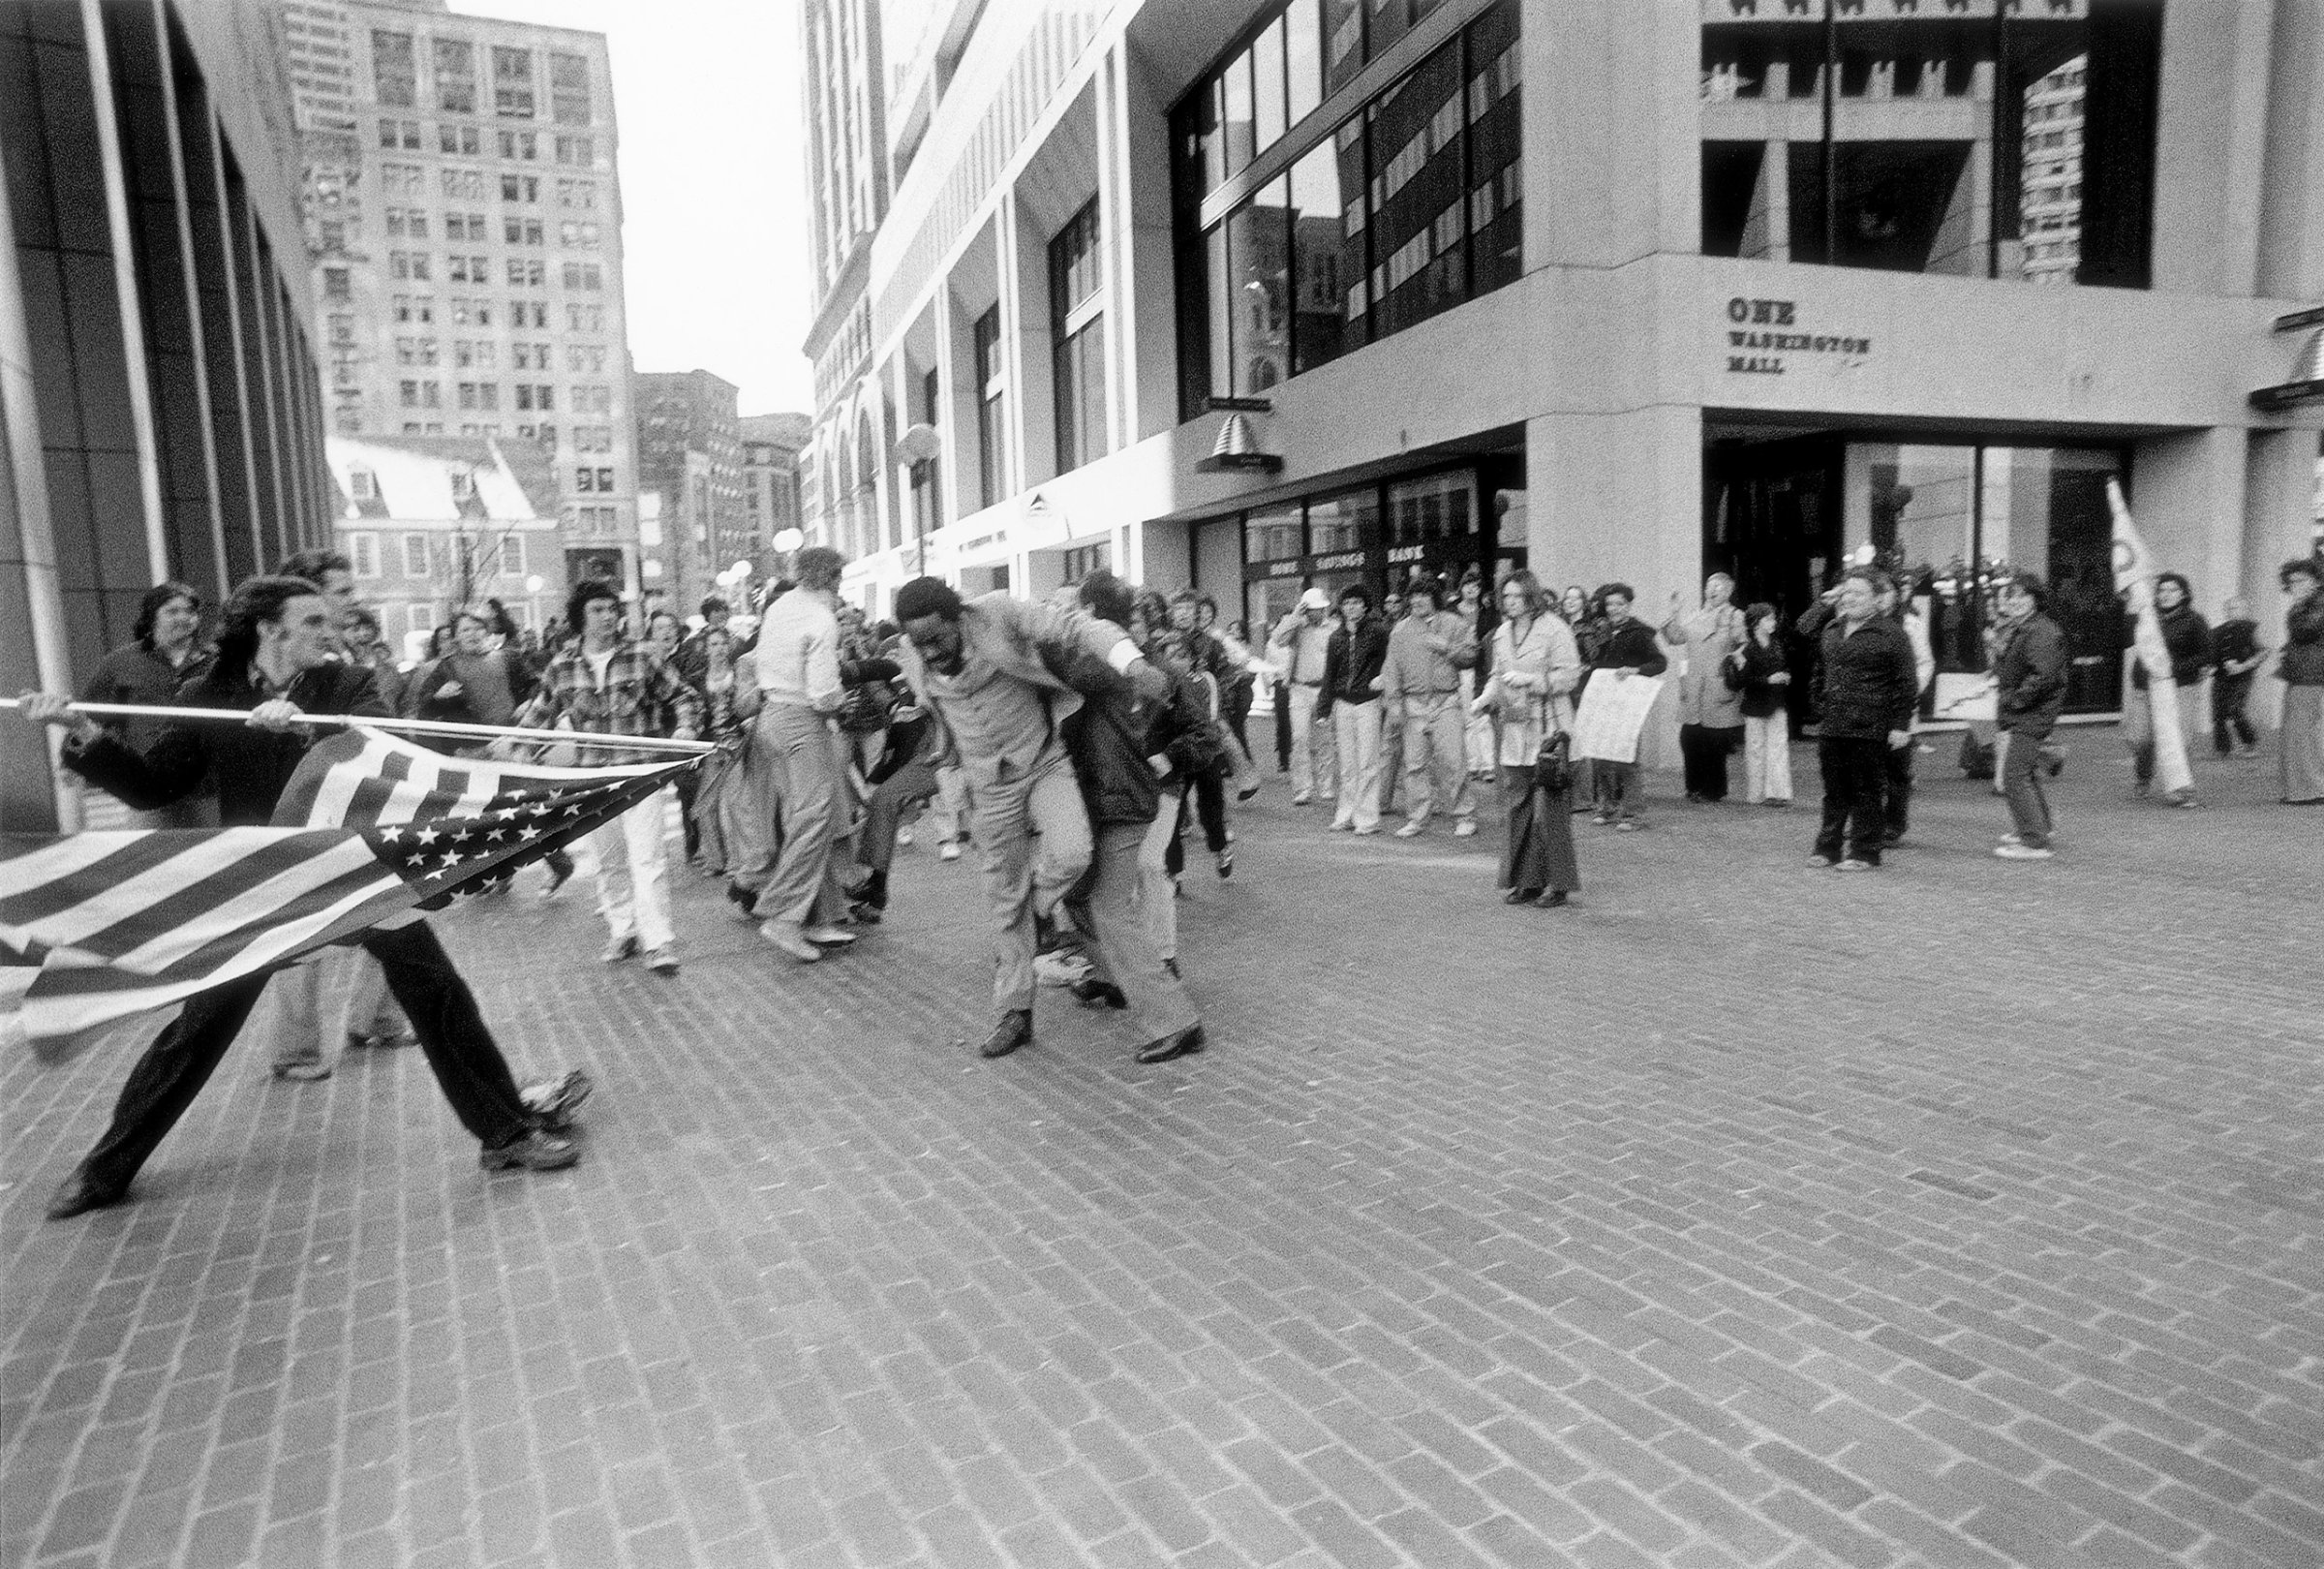 A white teenager, Joseph Rakes, is seen about to assault black lawyer and civil-rights activist Ted Landsmark with a flagpole bearing the American flag in Boston, April 5, 1976.